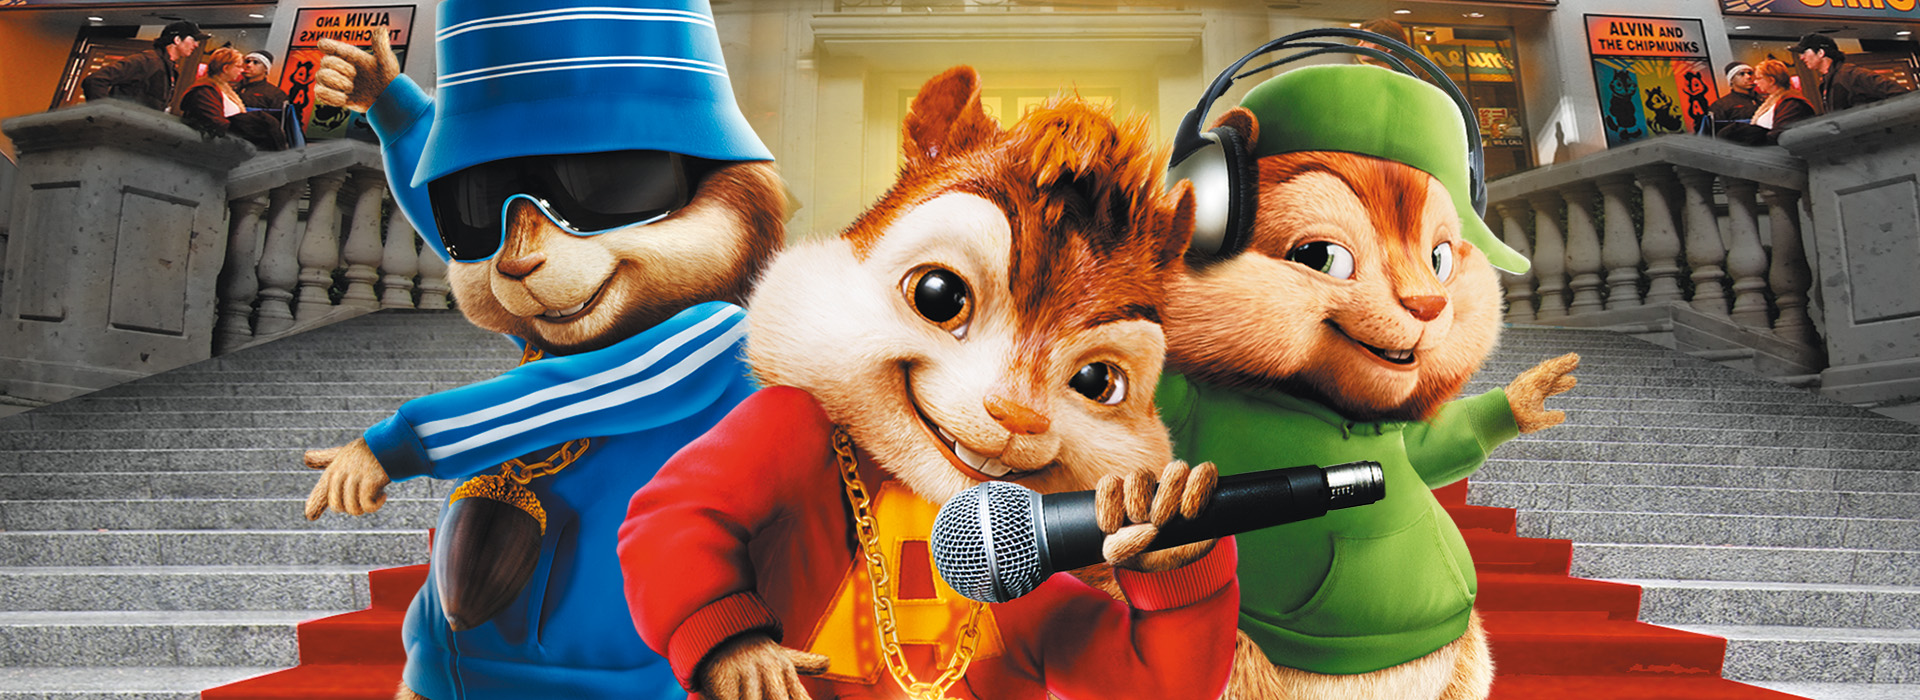 Movie poster Alvin and the Chipmunks